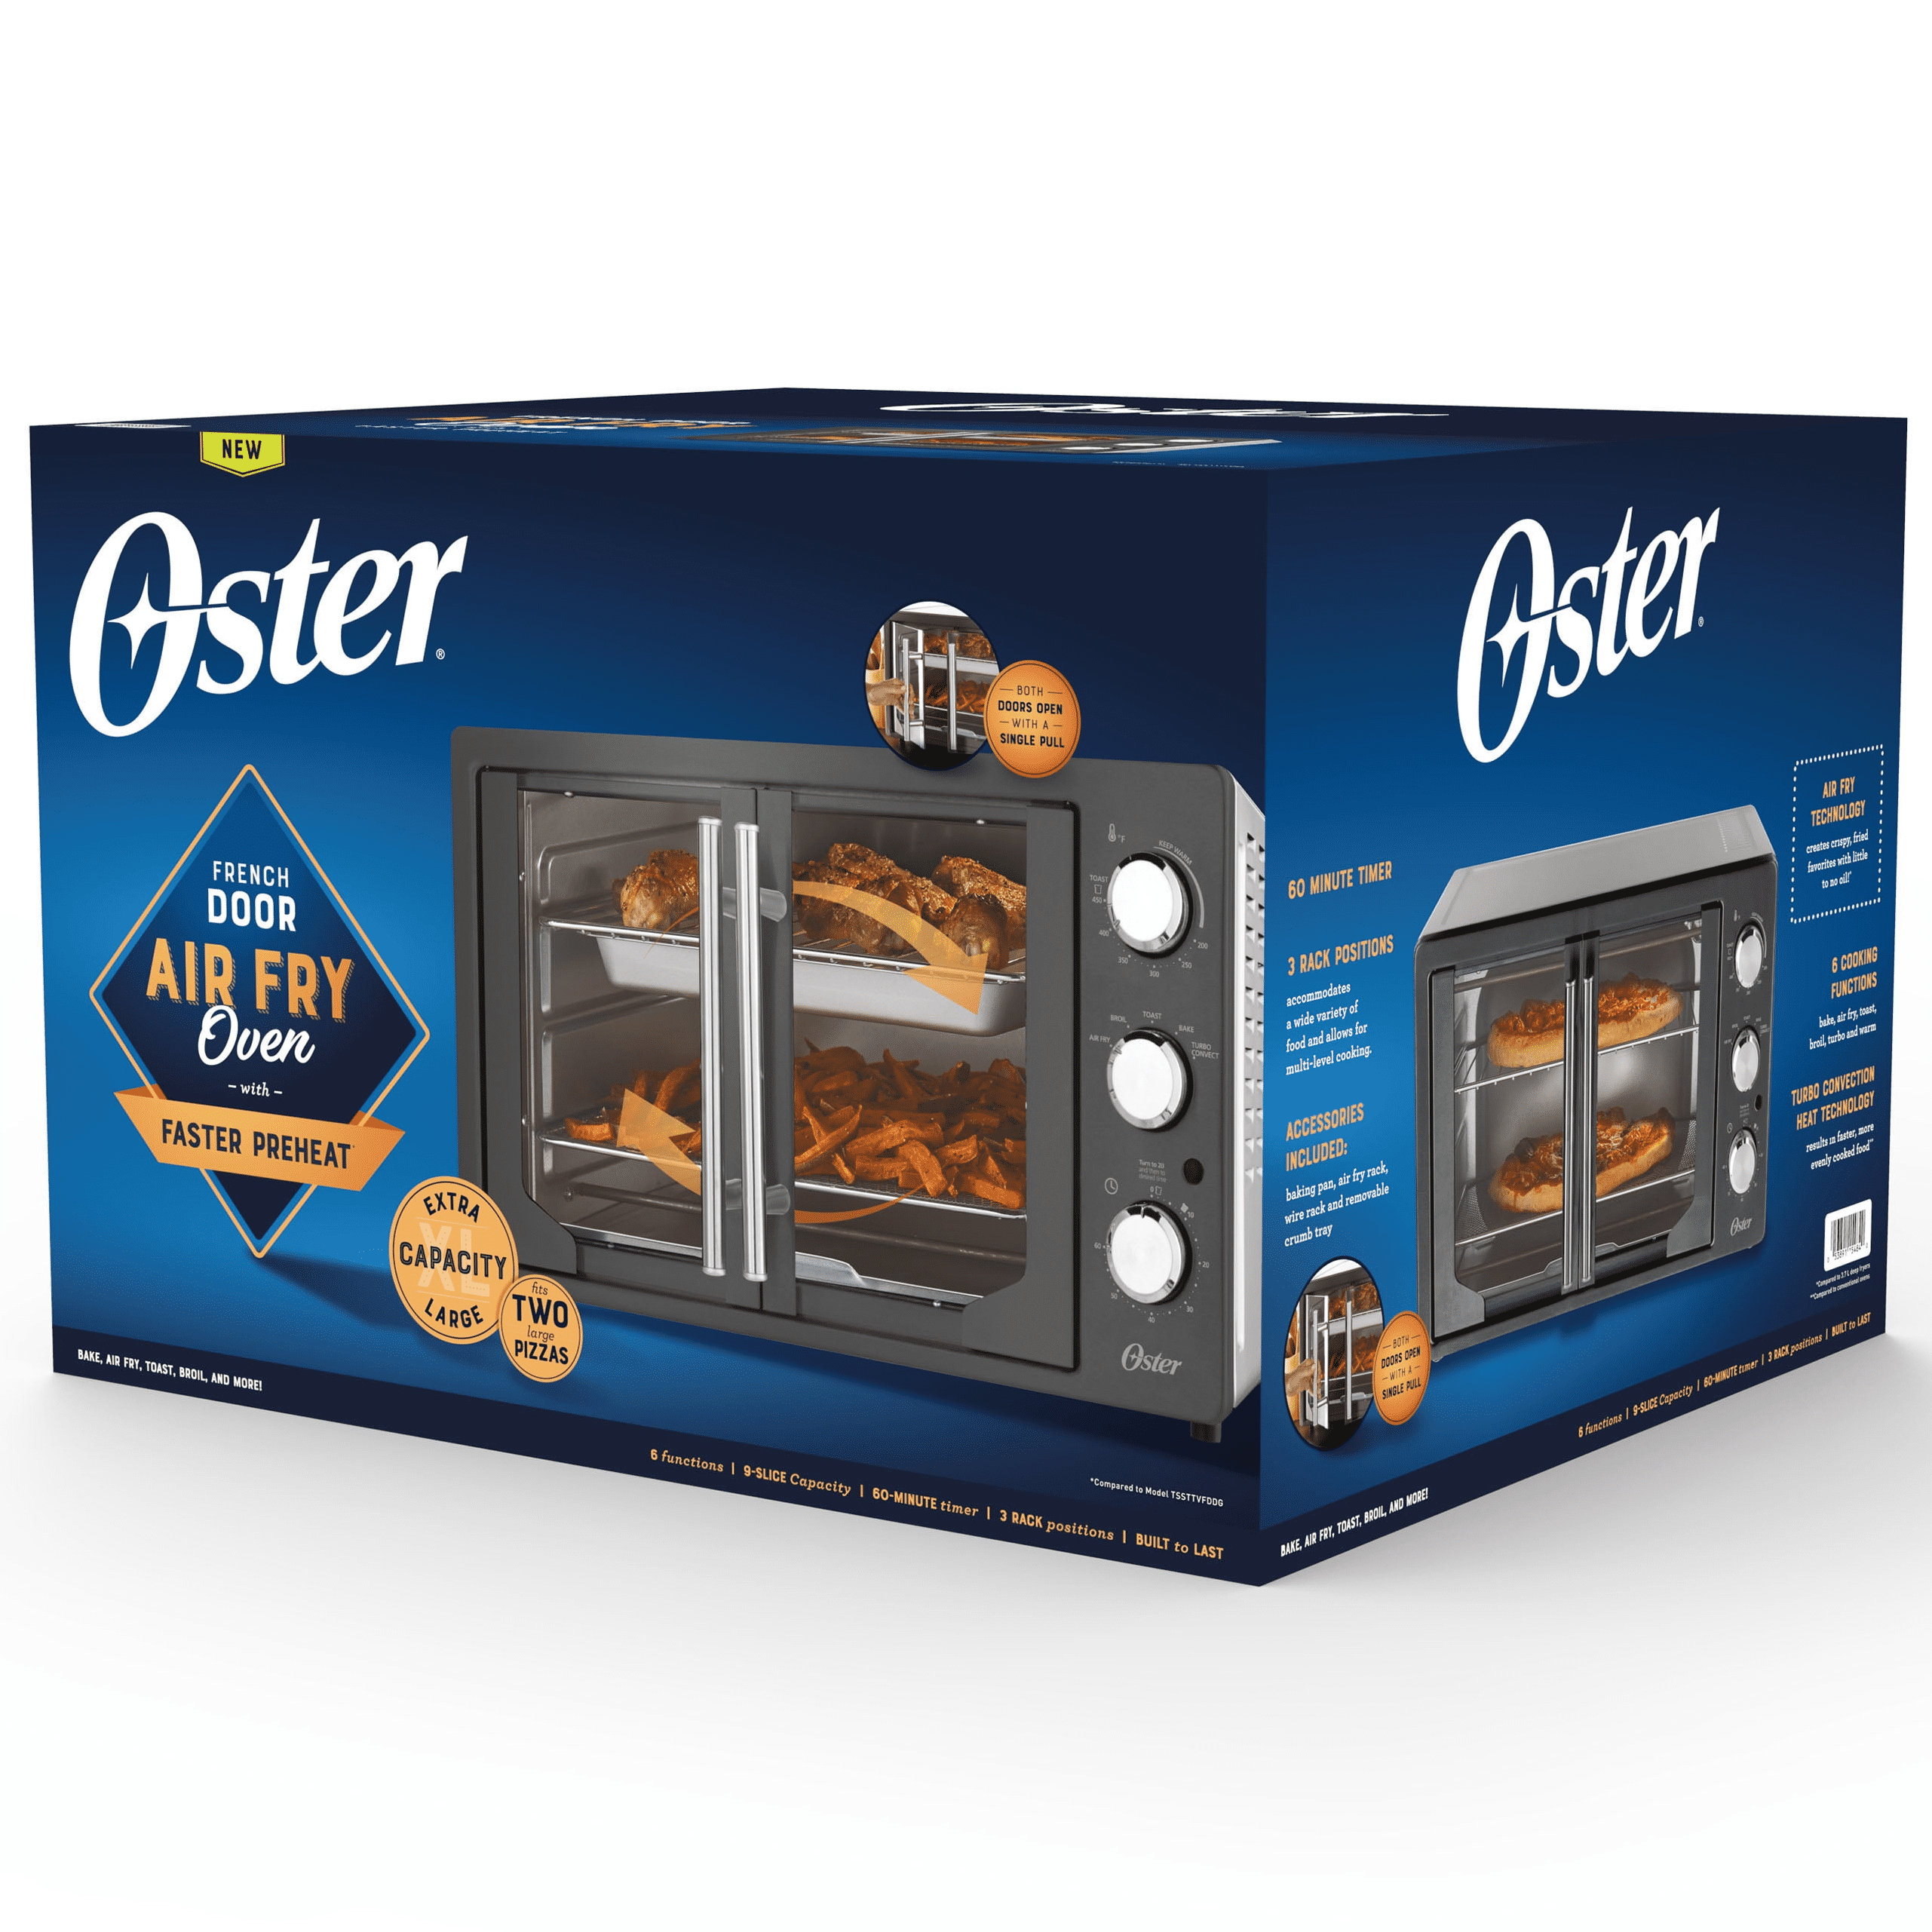 Oster Extra-Large Digital Air Fry Oven Review 